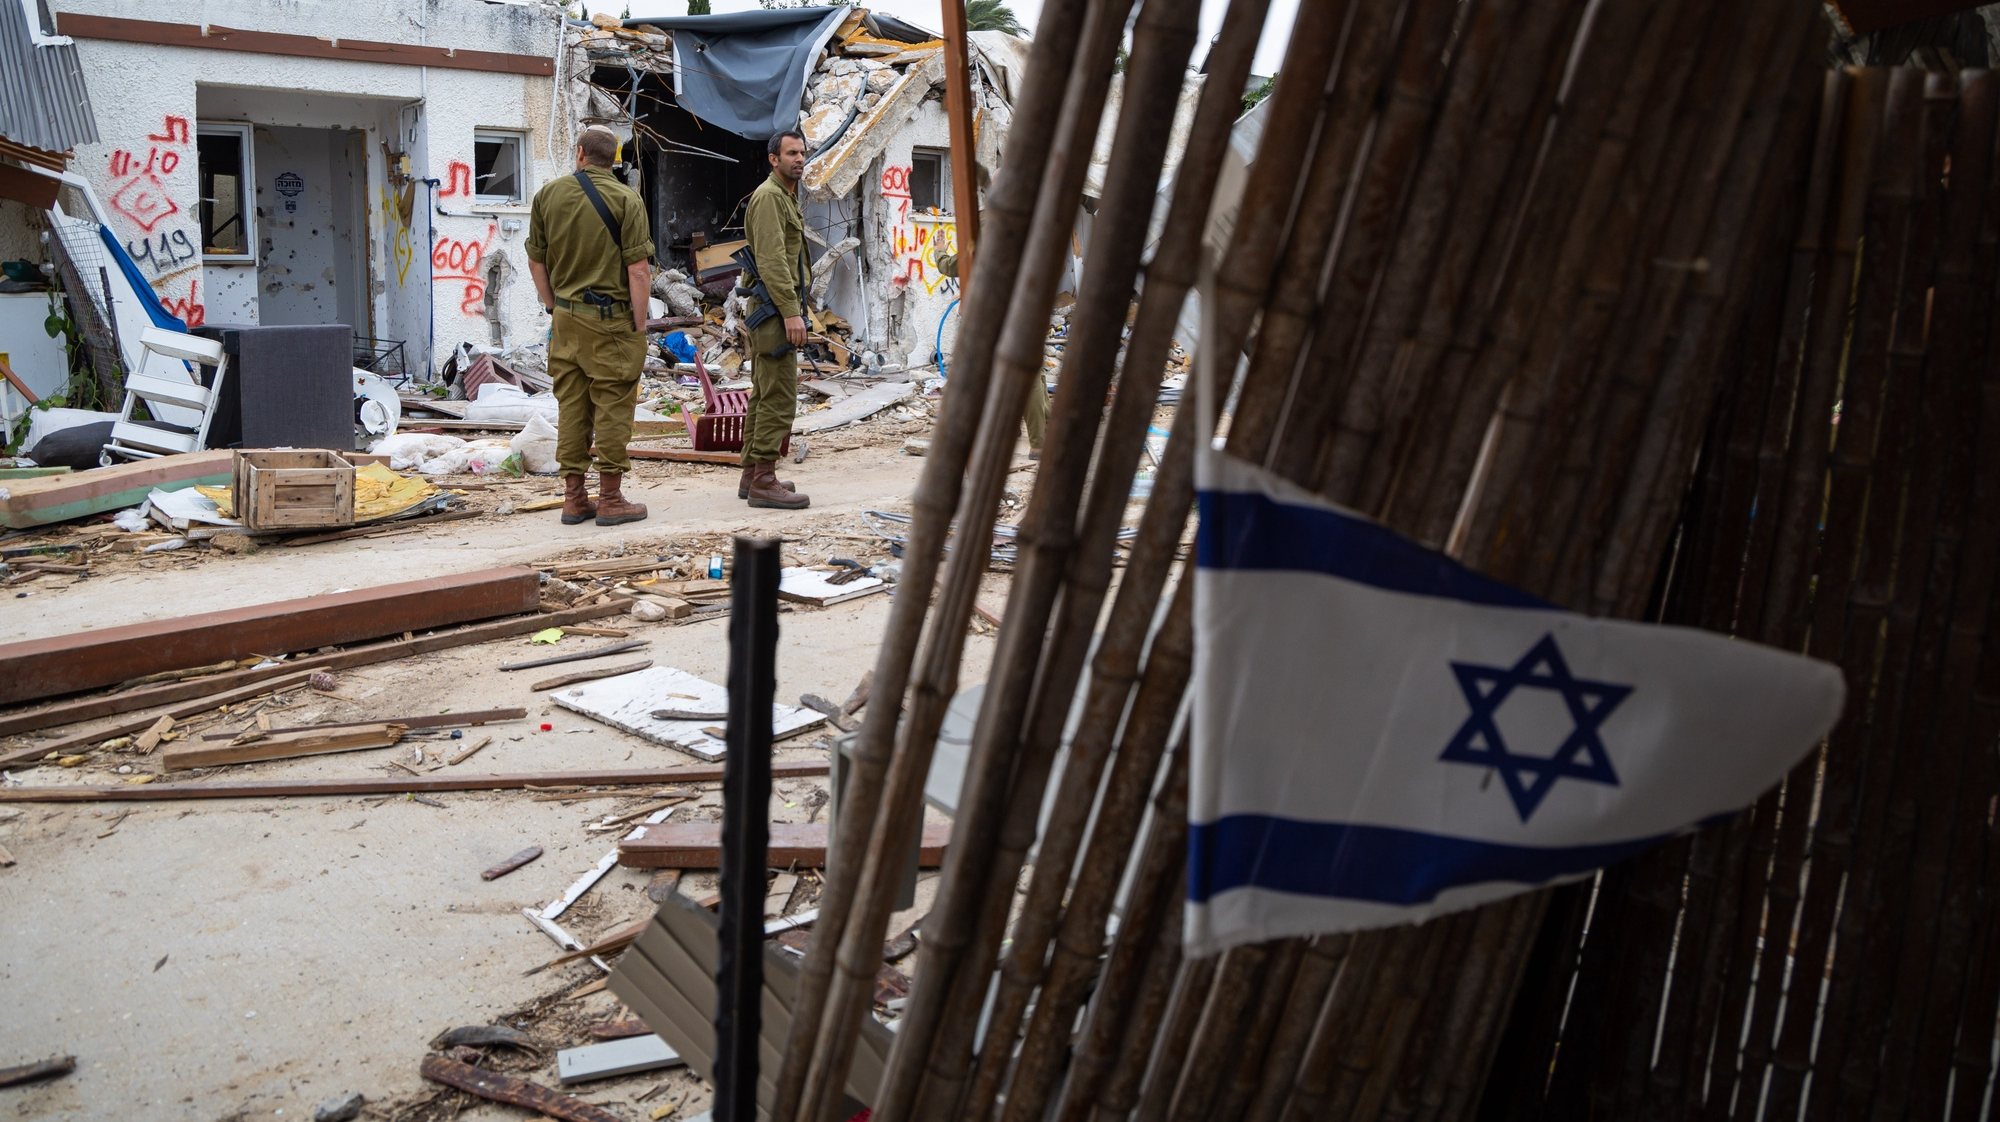 epa10989455 Israeli soldiers stand near damaged homes during a press visit at Kfar Aza Kibbutz, southern Israel, 22 November 2023. The kibbutz, located near the Gaza border, was the scene of an Hamas attack on 07 October which resulted in the deaths of dozens of Israelis. More than 12,700 Palestinians and at least 1,200 Israelis have been killed, according to the Israel Defense Forces (IDF) and the Palestinian health authority, since Hamas militants launched an attack against Israel from the Gaza Strip on 07 October, and the Israeli operations in Gaza and the West Bank which followed it.  EPA/CHRISTOPHE PETIT TESSON